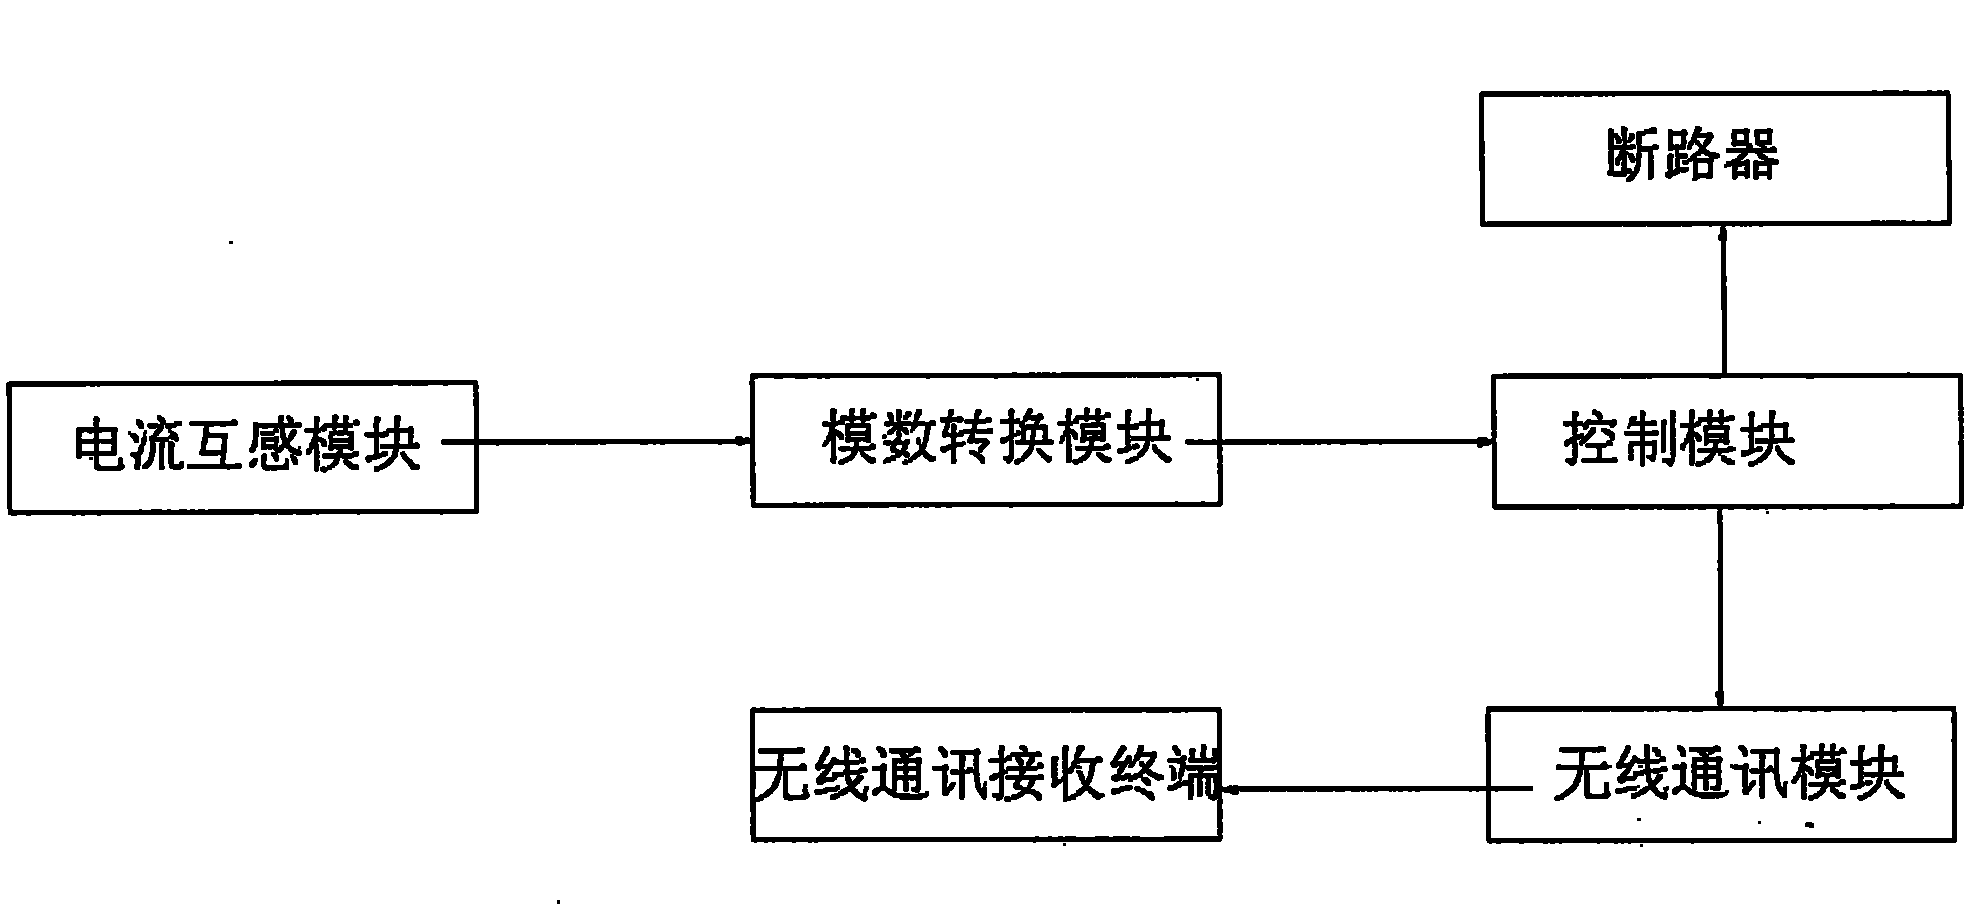 Intelligent monitoring system of switch of branch circuit